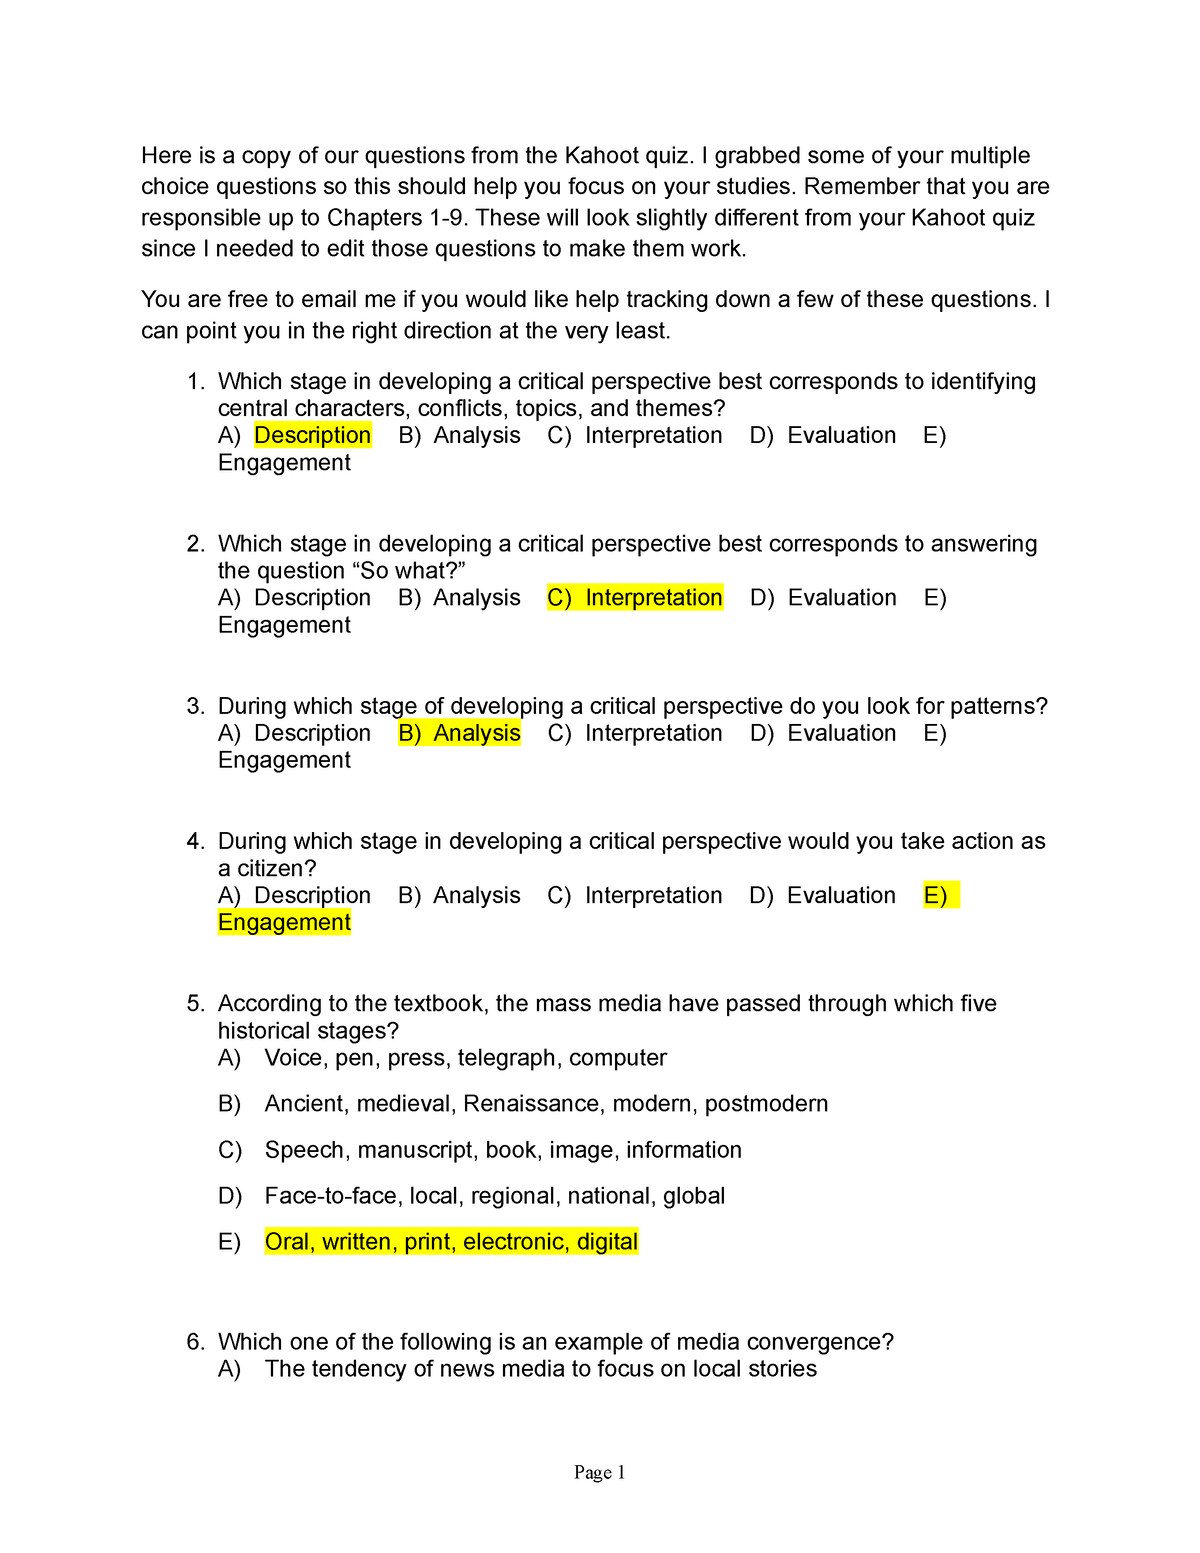 100 Question Study Guide - Here is a copy of our questions from the Kahoot  quiz. I grabbed some of - Studocu